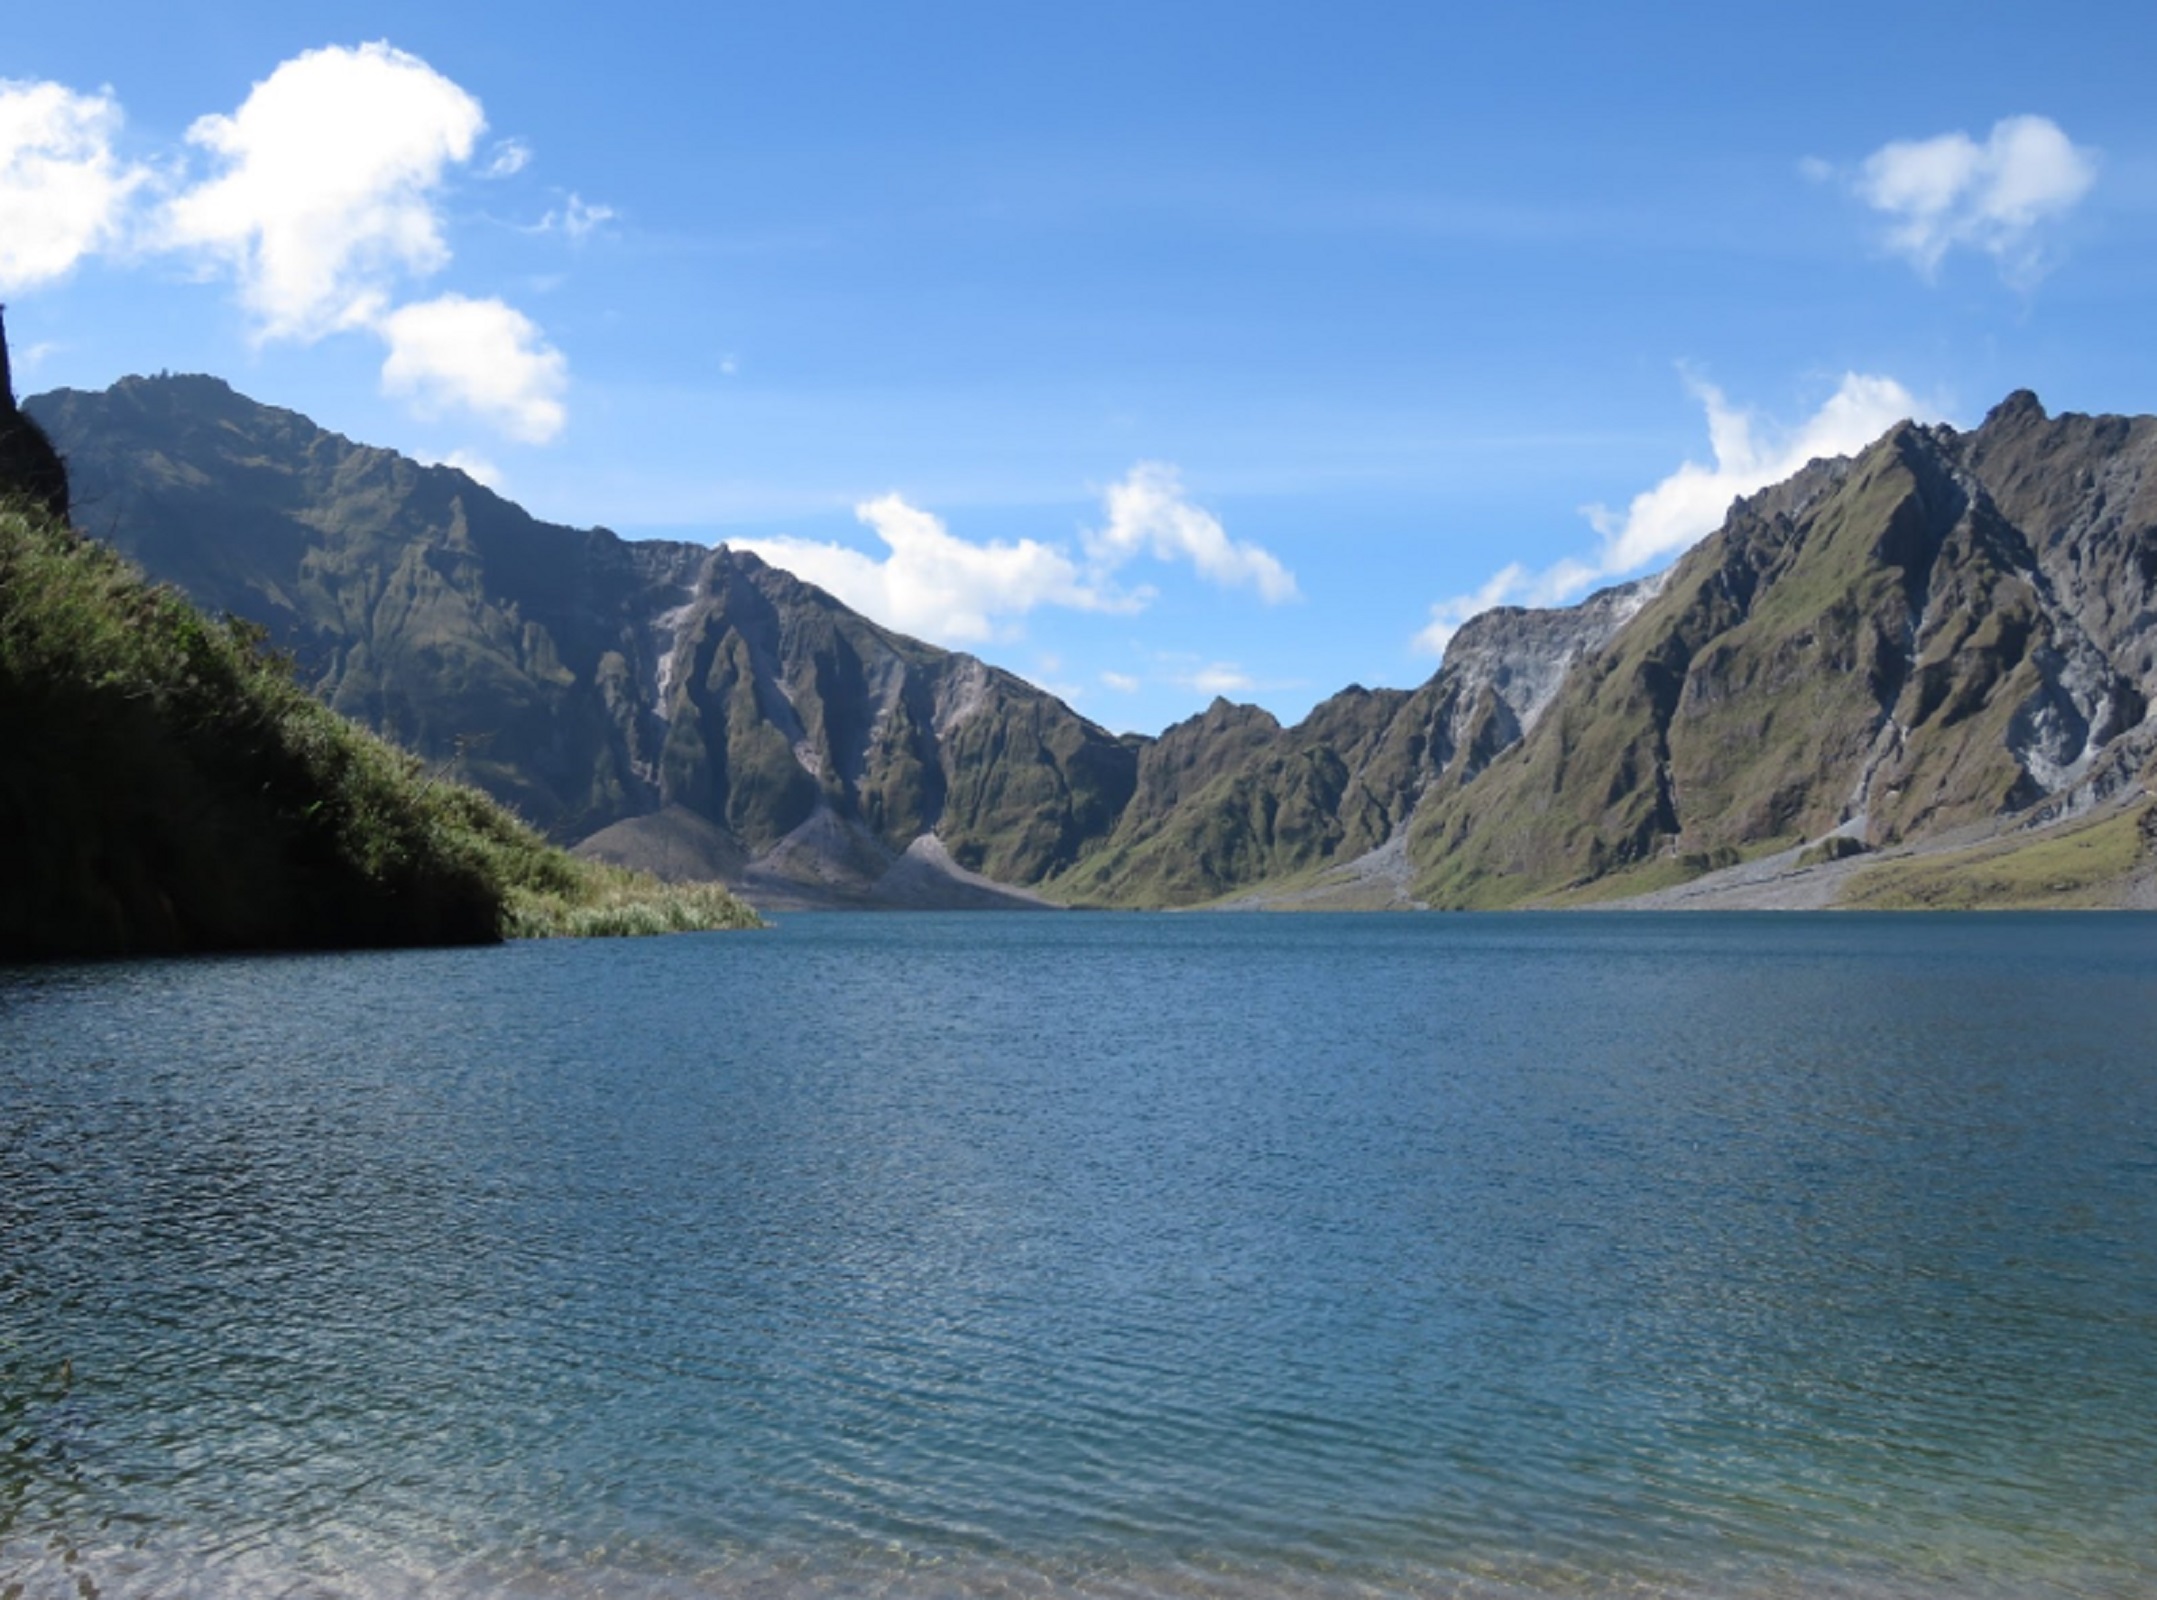 Guided Full Day Hike To Mt Pinatubo Crater Lake With 4x4 4152